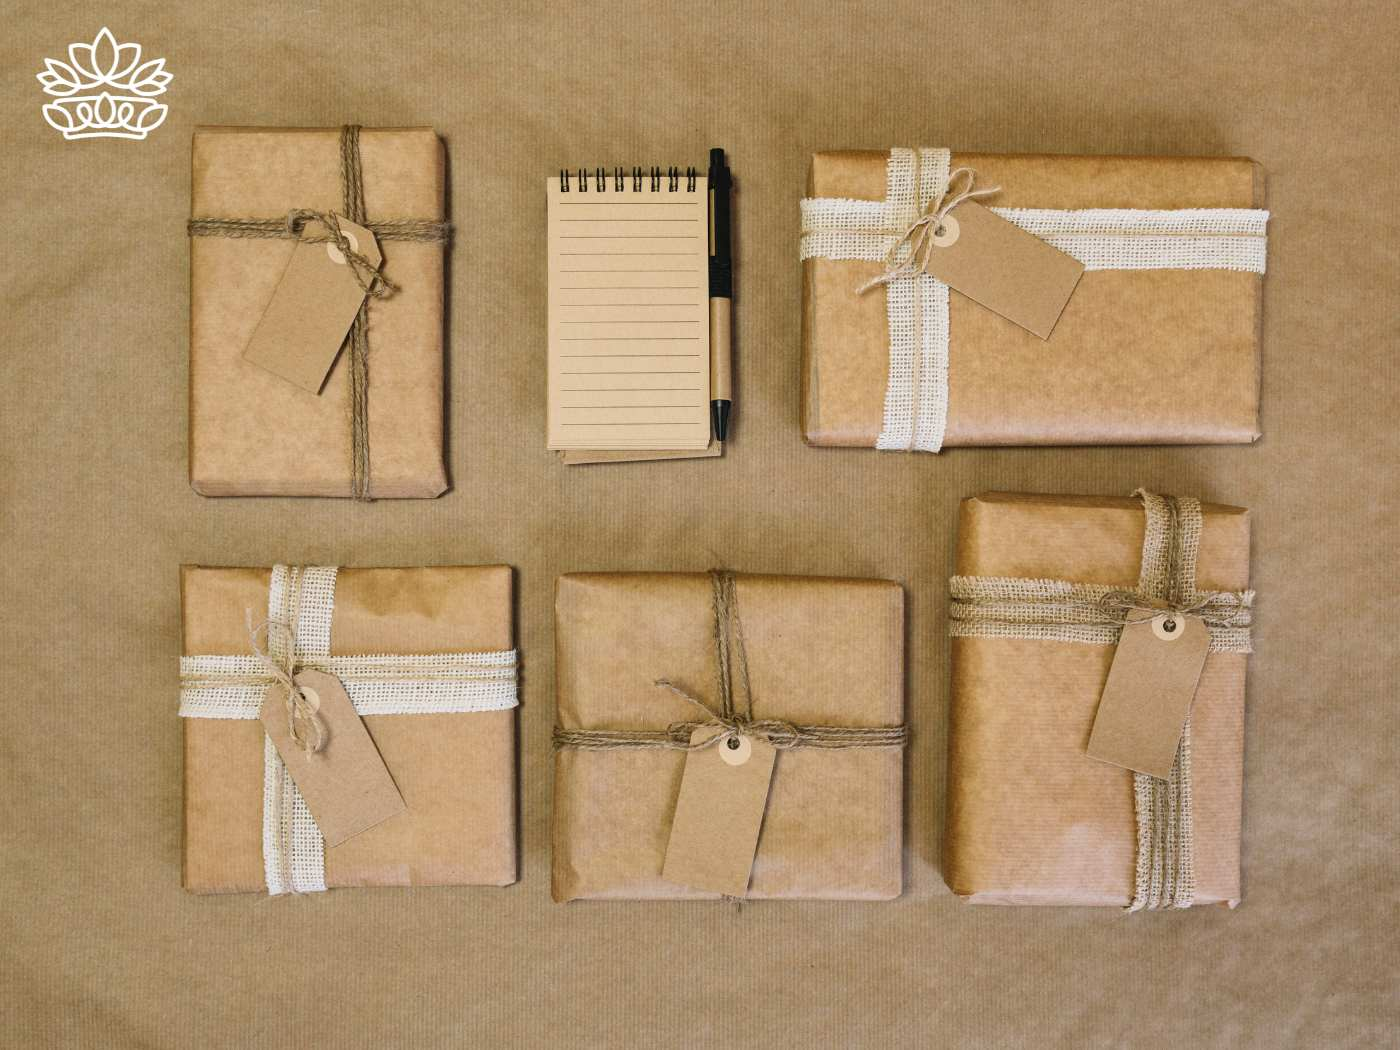 Rustic style gender-neutral gift boxes, each uniquely customized with tags and ribbons, offering accessible gifting ideas for any occasion, night or day, from the Gender Neutral Gift Boxes Collection at Fabulous Flowers and Gifts.